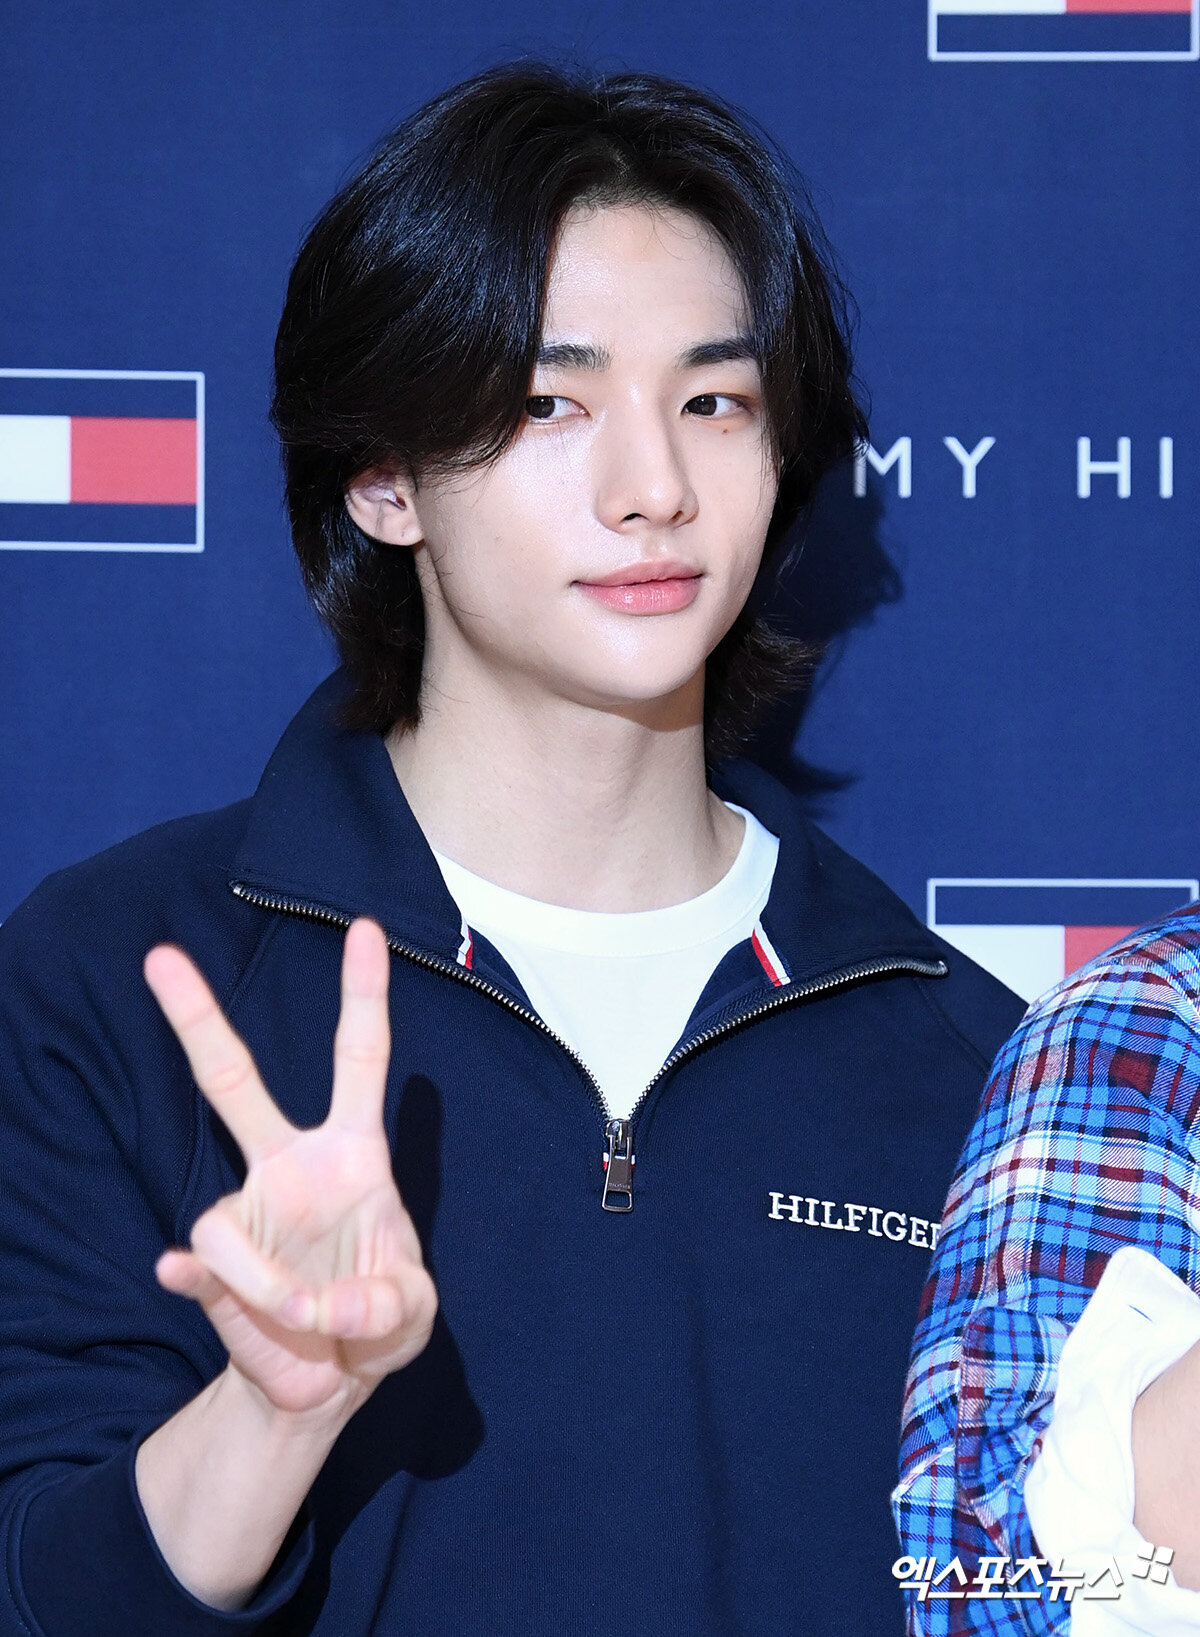 Hyunjin of Stray Kids returns after bullying scandal - The Korea Times